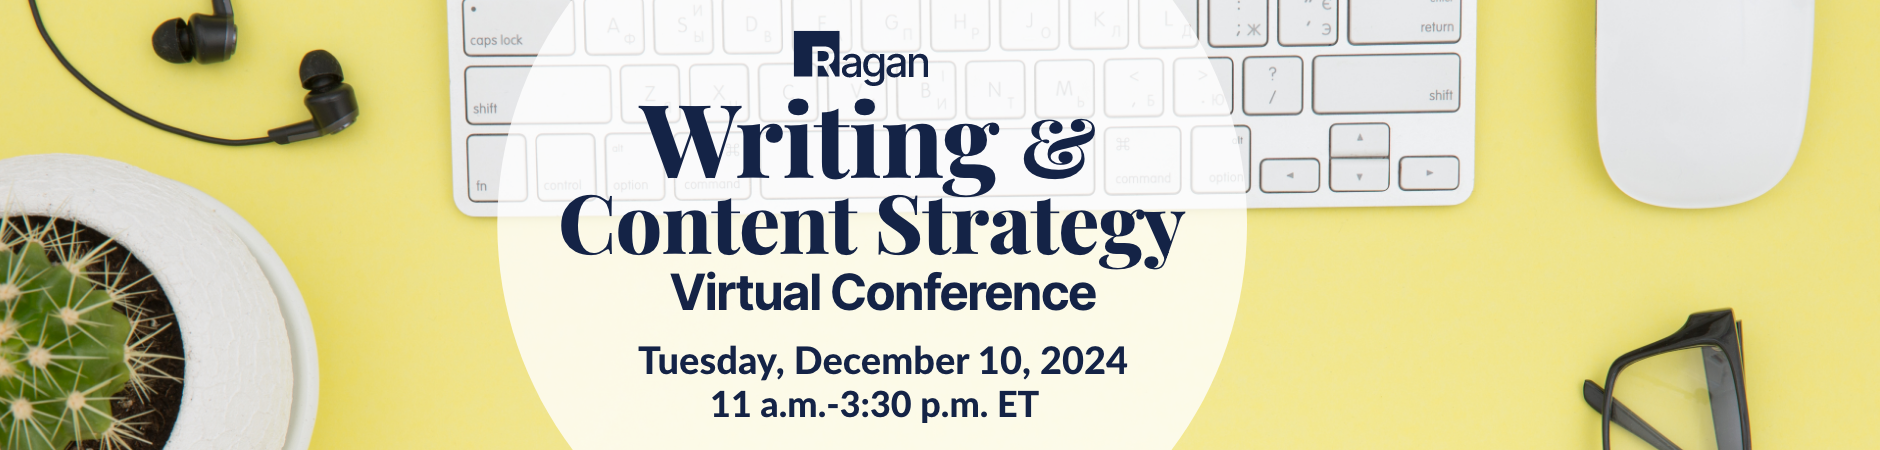 Writing & Content Strategy Virtual Conference